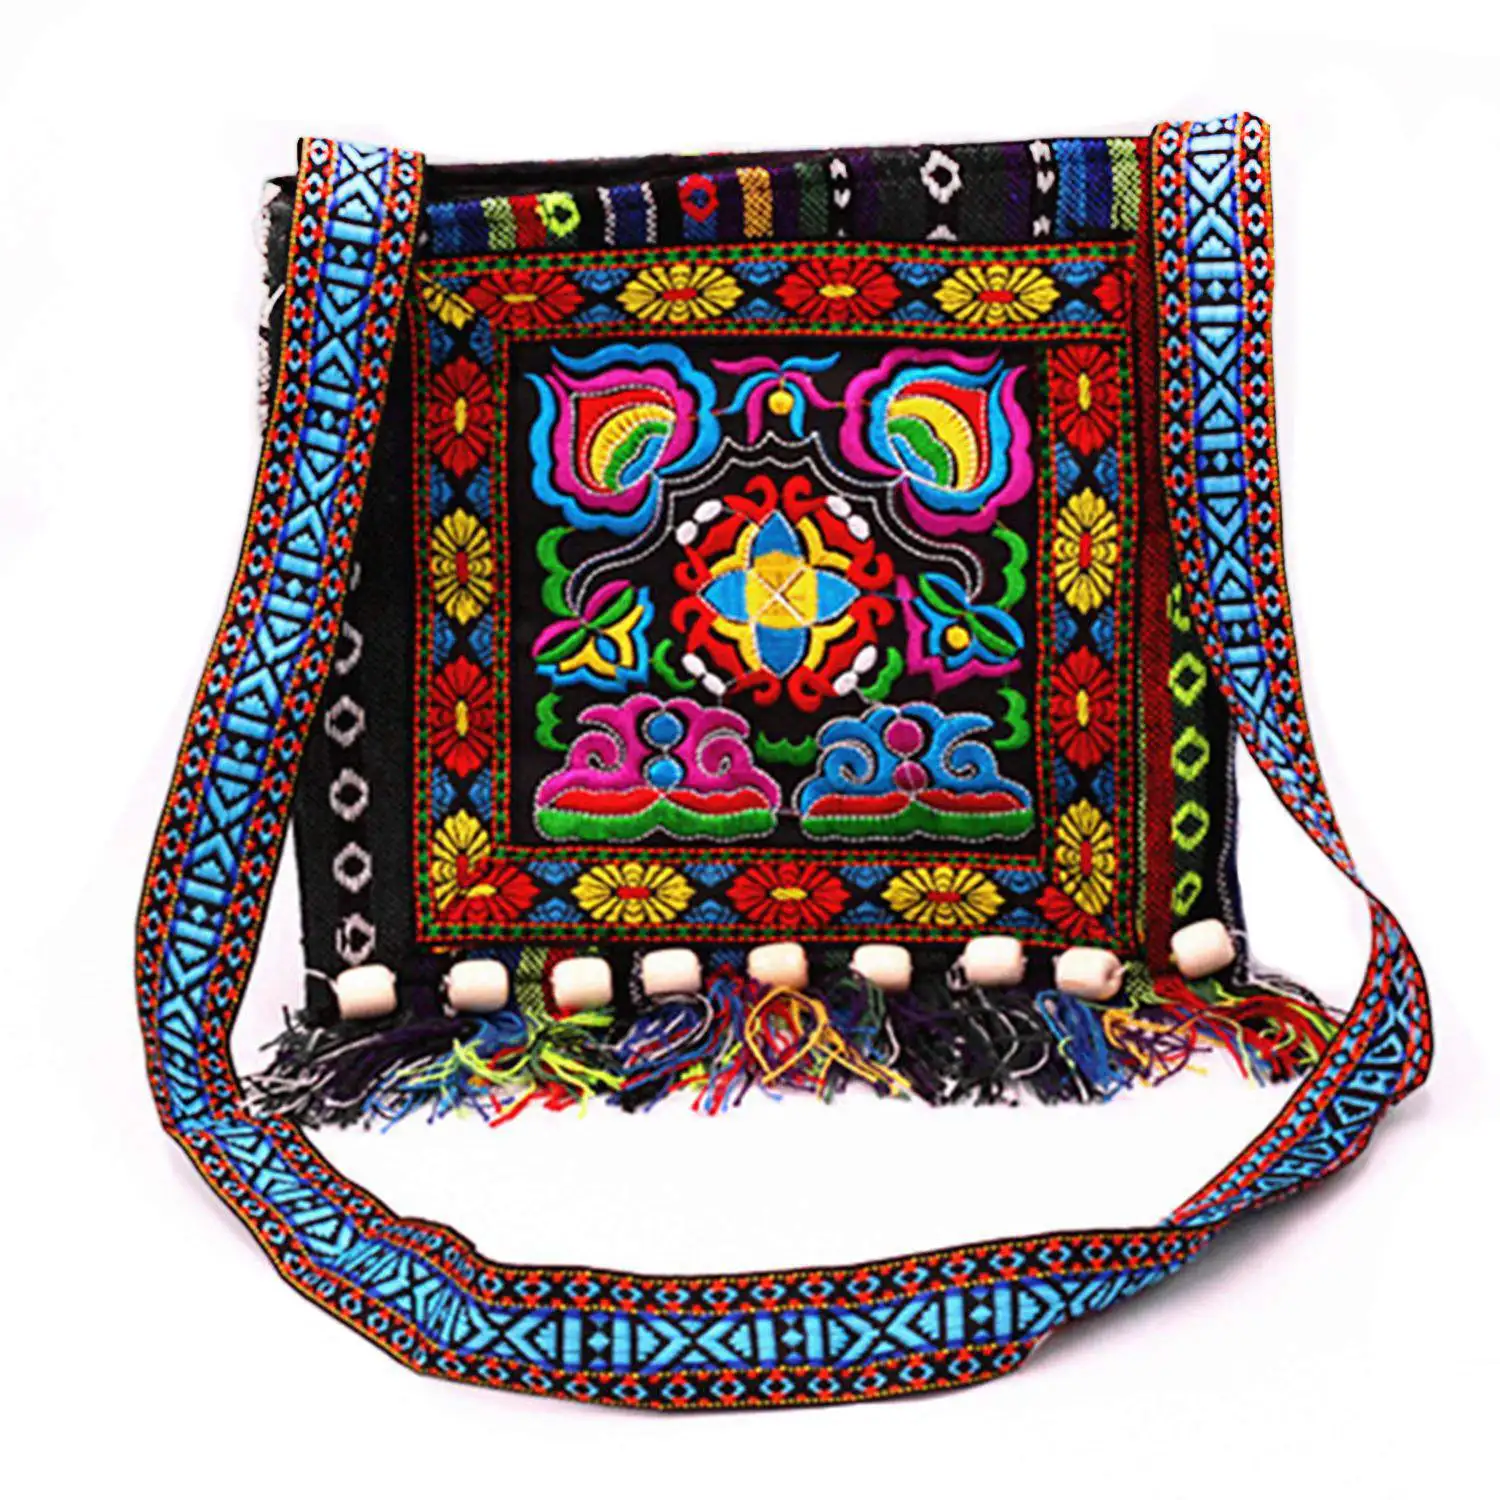 

FGGS Hmong Vintage Chinese National Style Ethnic Shoulder Bag Embroidery Boho Hippie Tassel Tote Messenger